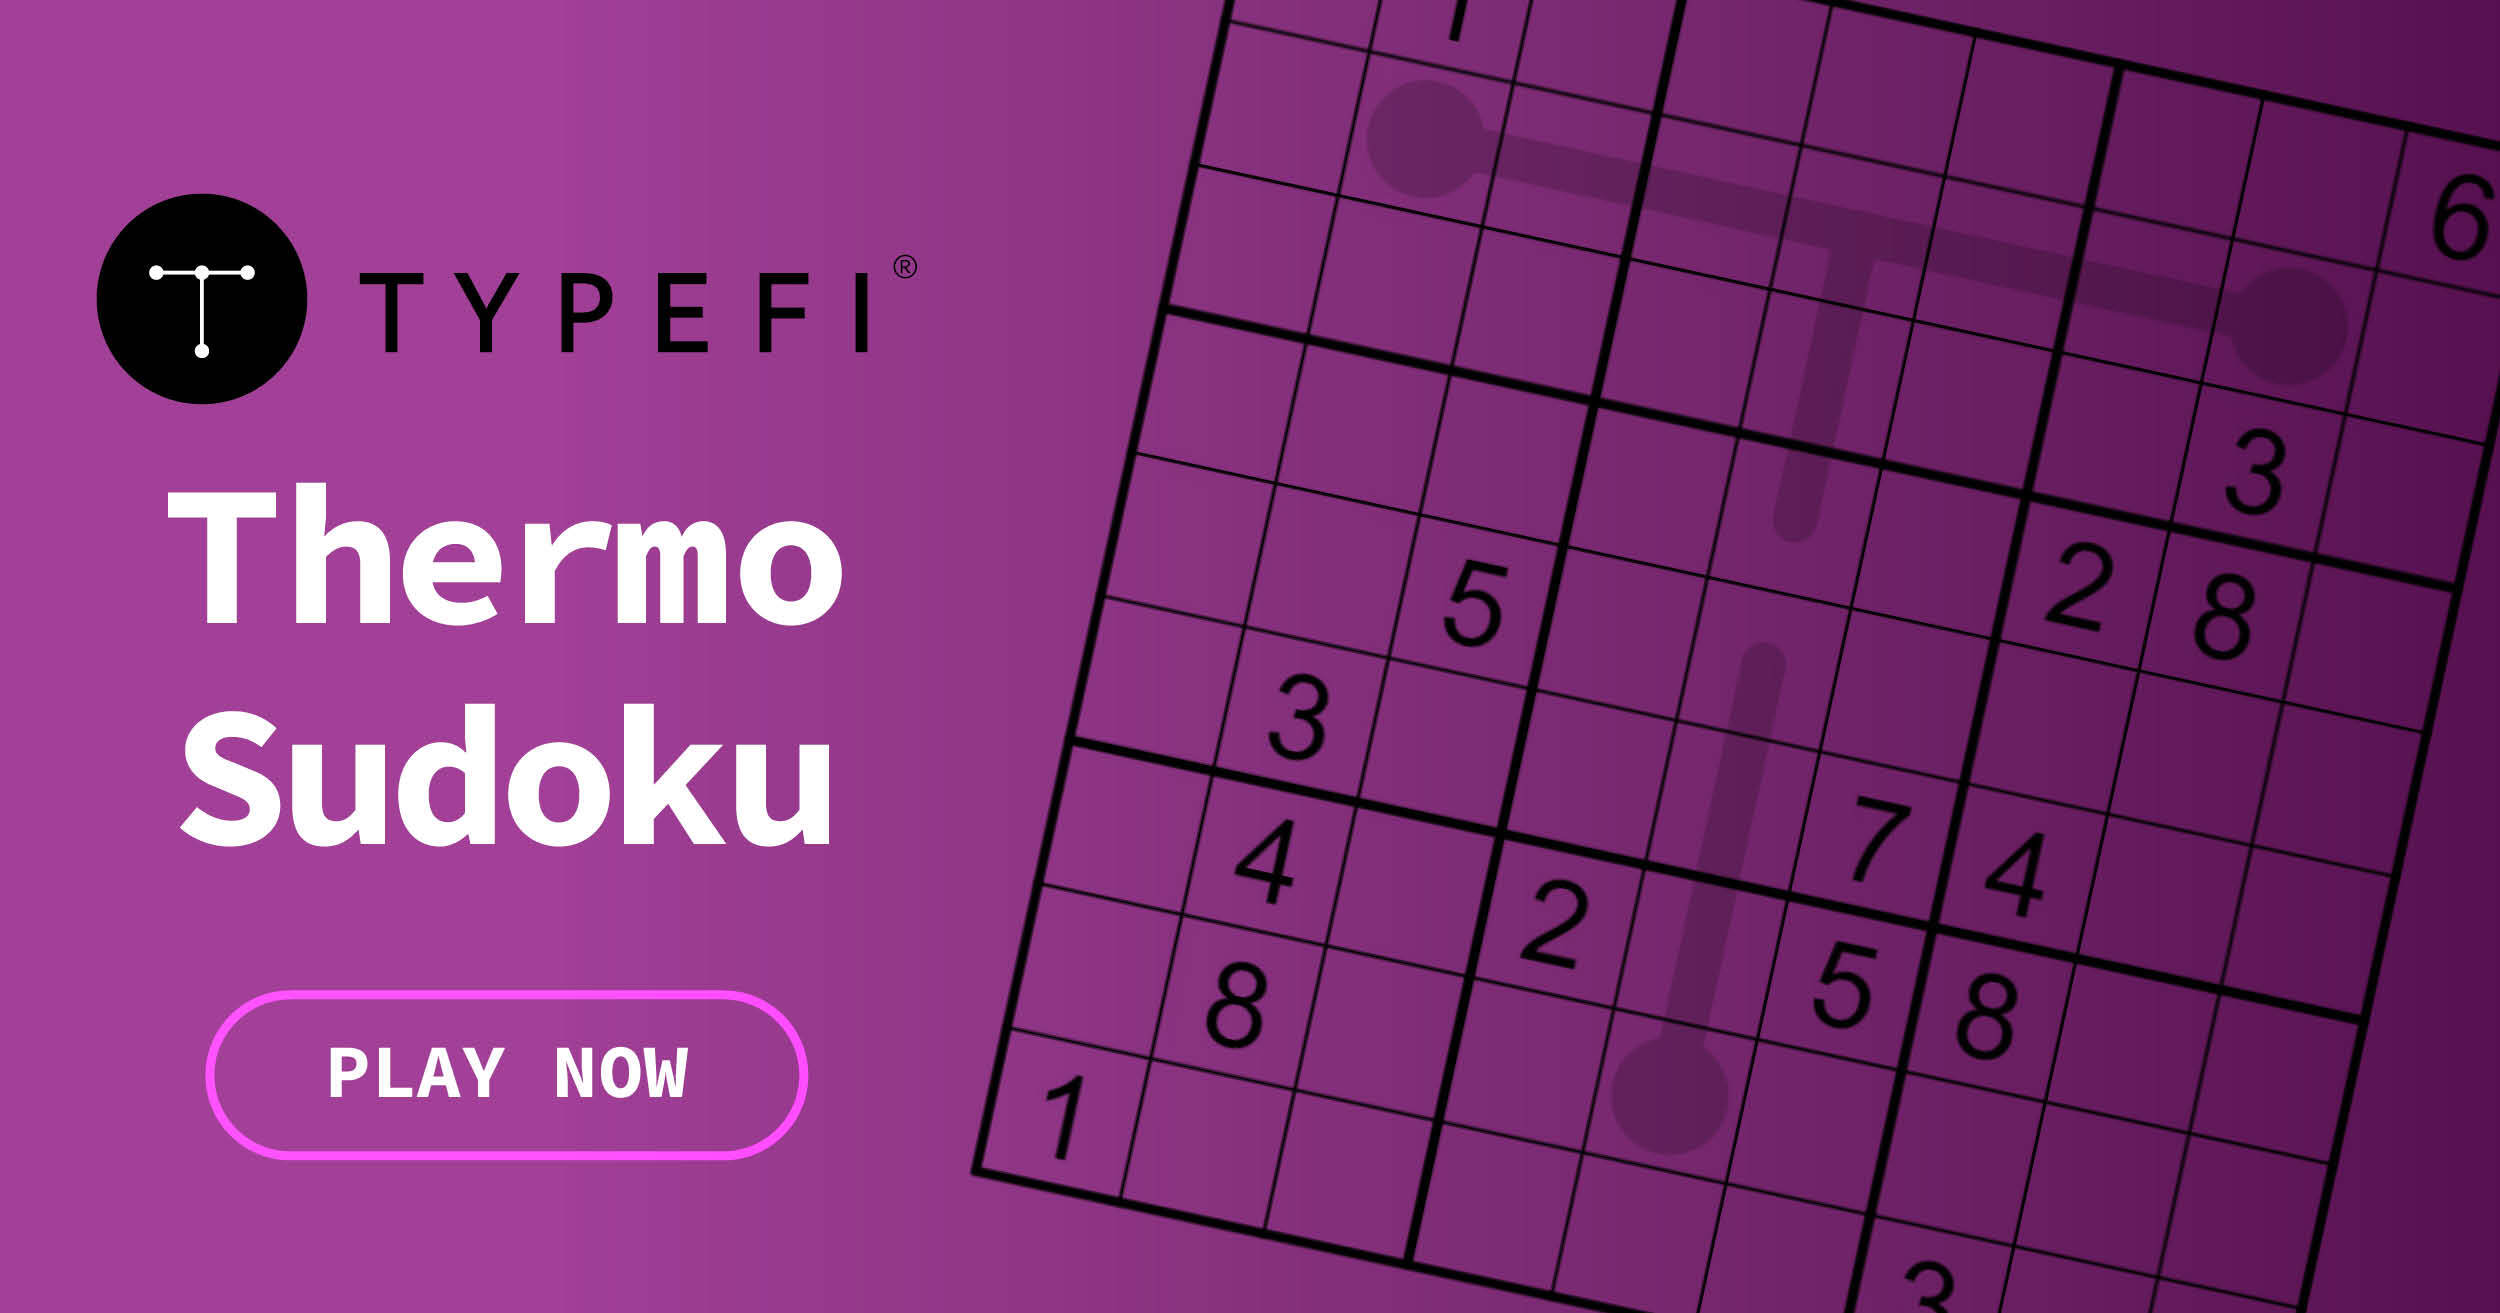 A promo graphic inviting you to play the Typefi Thermo Sudoku